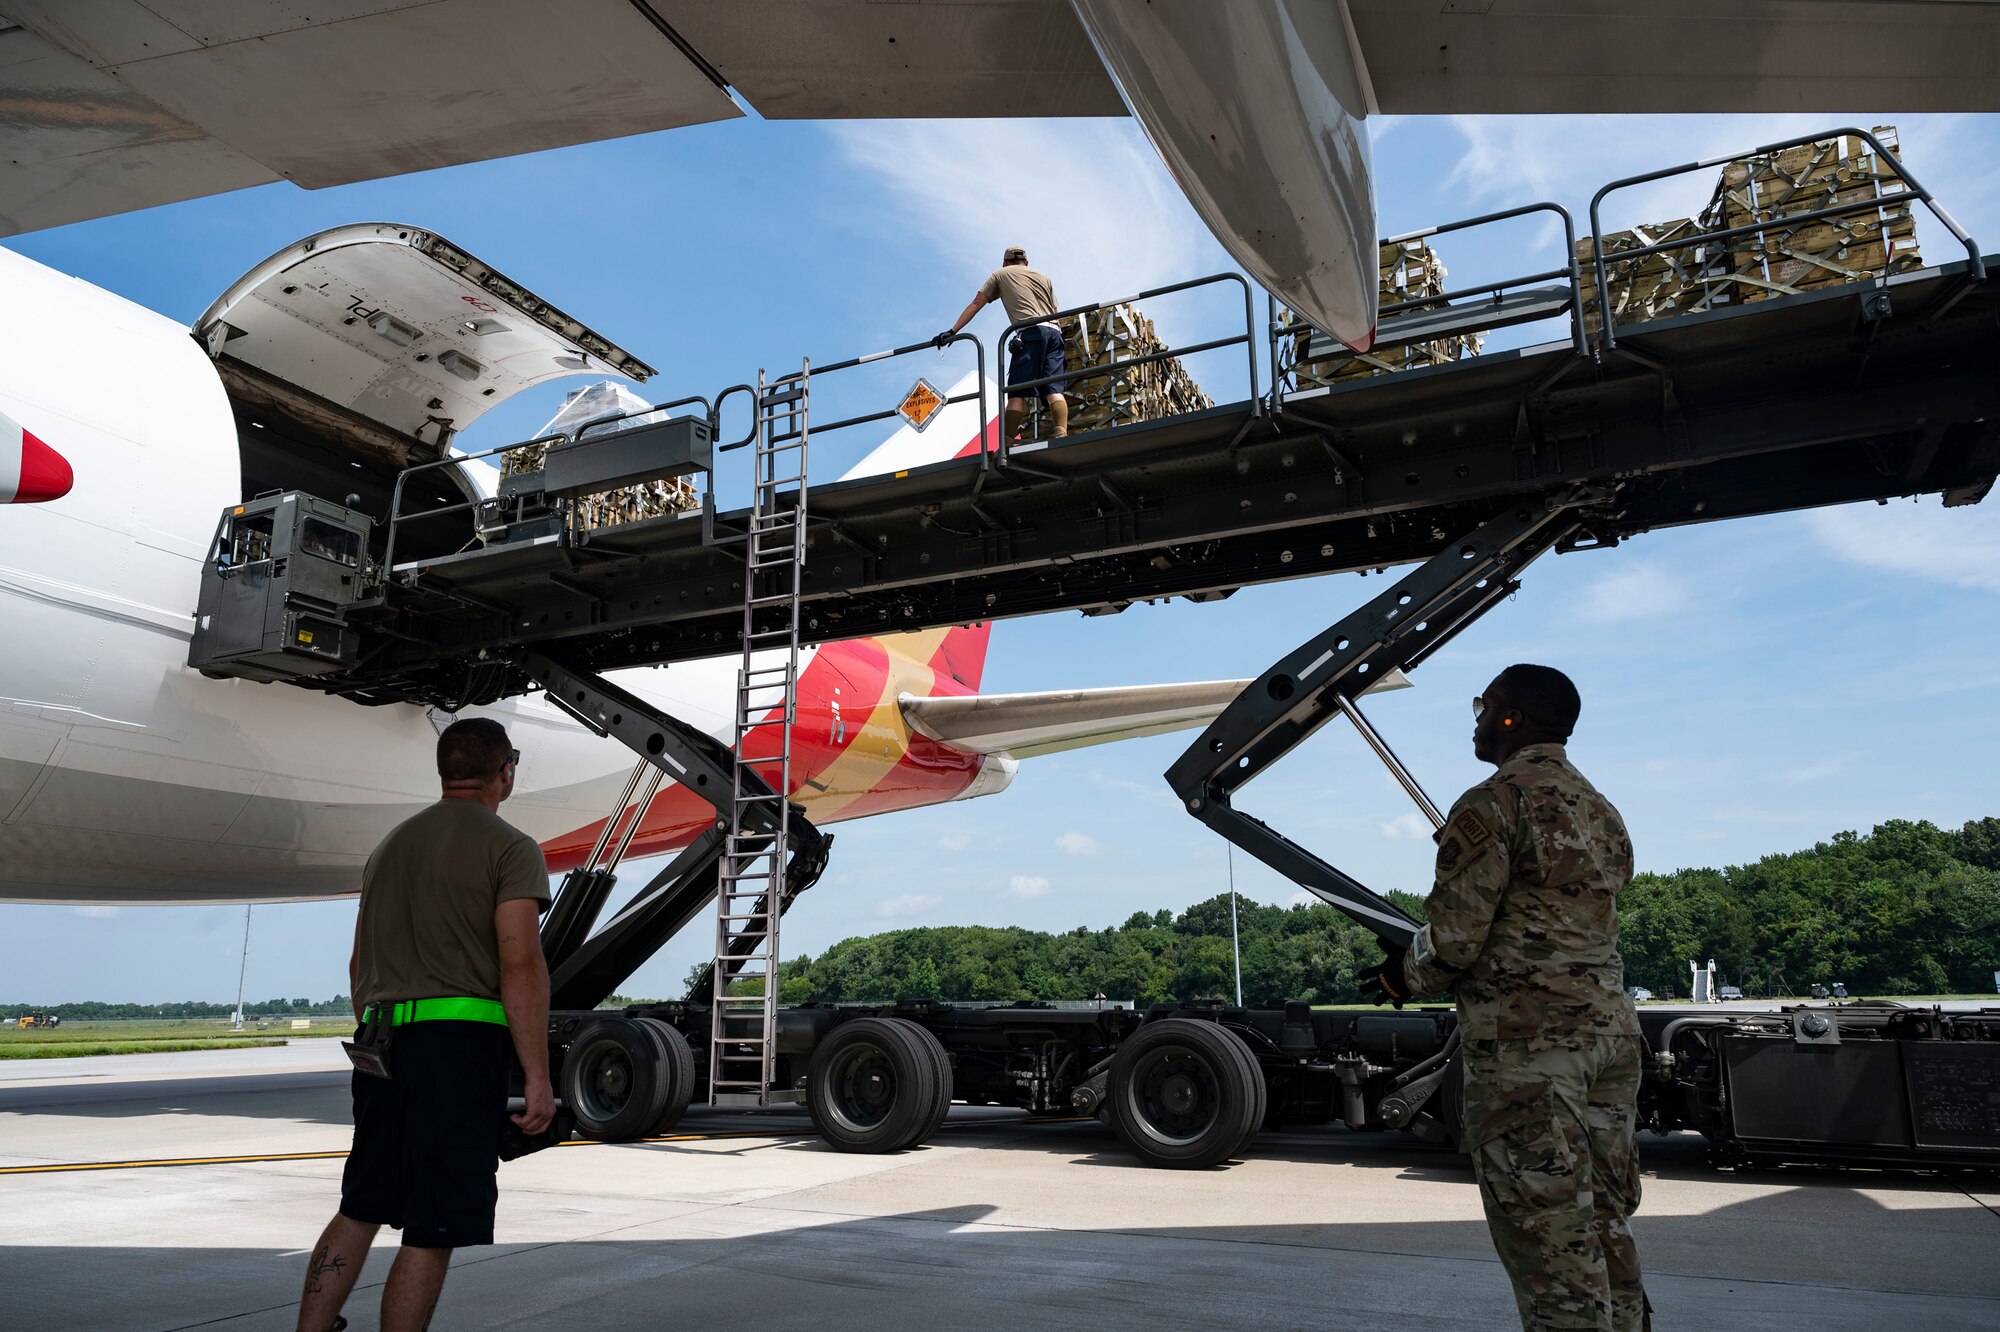 Airmen from the 436th Aerial Port Squadron assist in loading ammunition onto a commercial plane bound for Ukraine during a security assistance mission at Dover Air Force Base, Delaware, July 21, 2022. The Department of Defense is providing Ukraine with critical capabilities to defend against Russian aggression under the Ukraine Security Assistance initiative. (U.S. Air Force photo by Senior Airman Faith Schaefer)